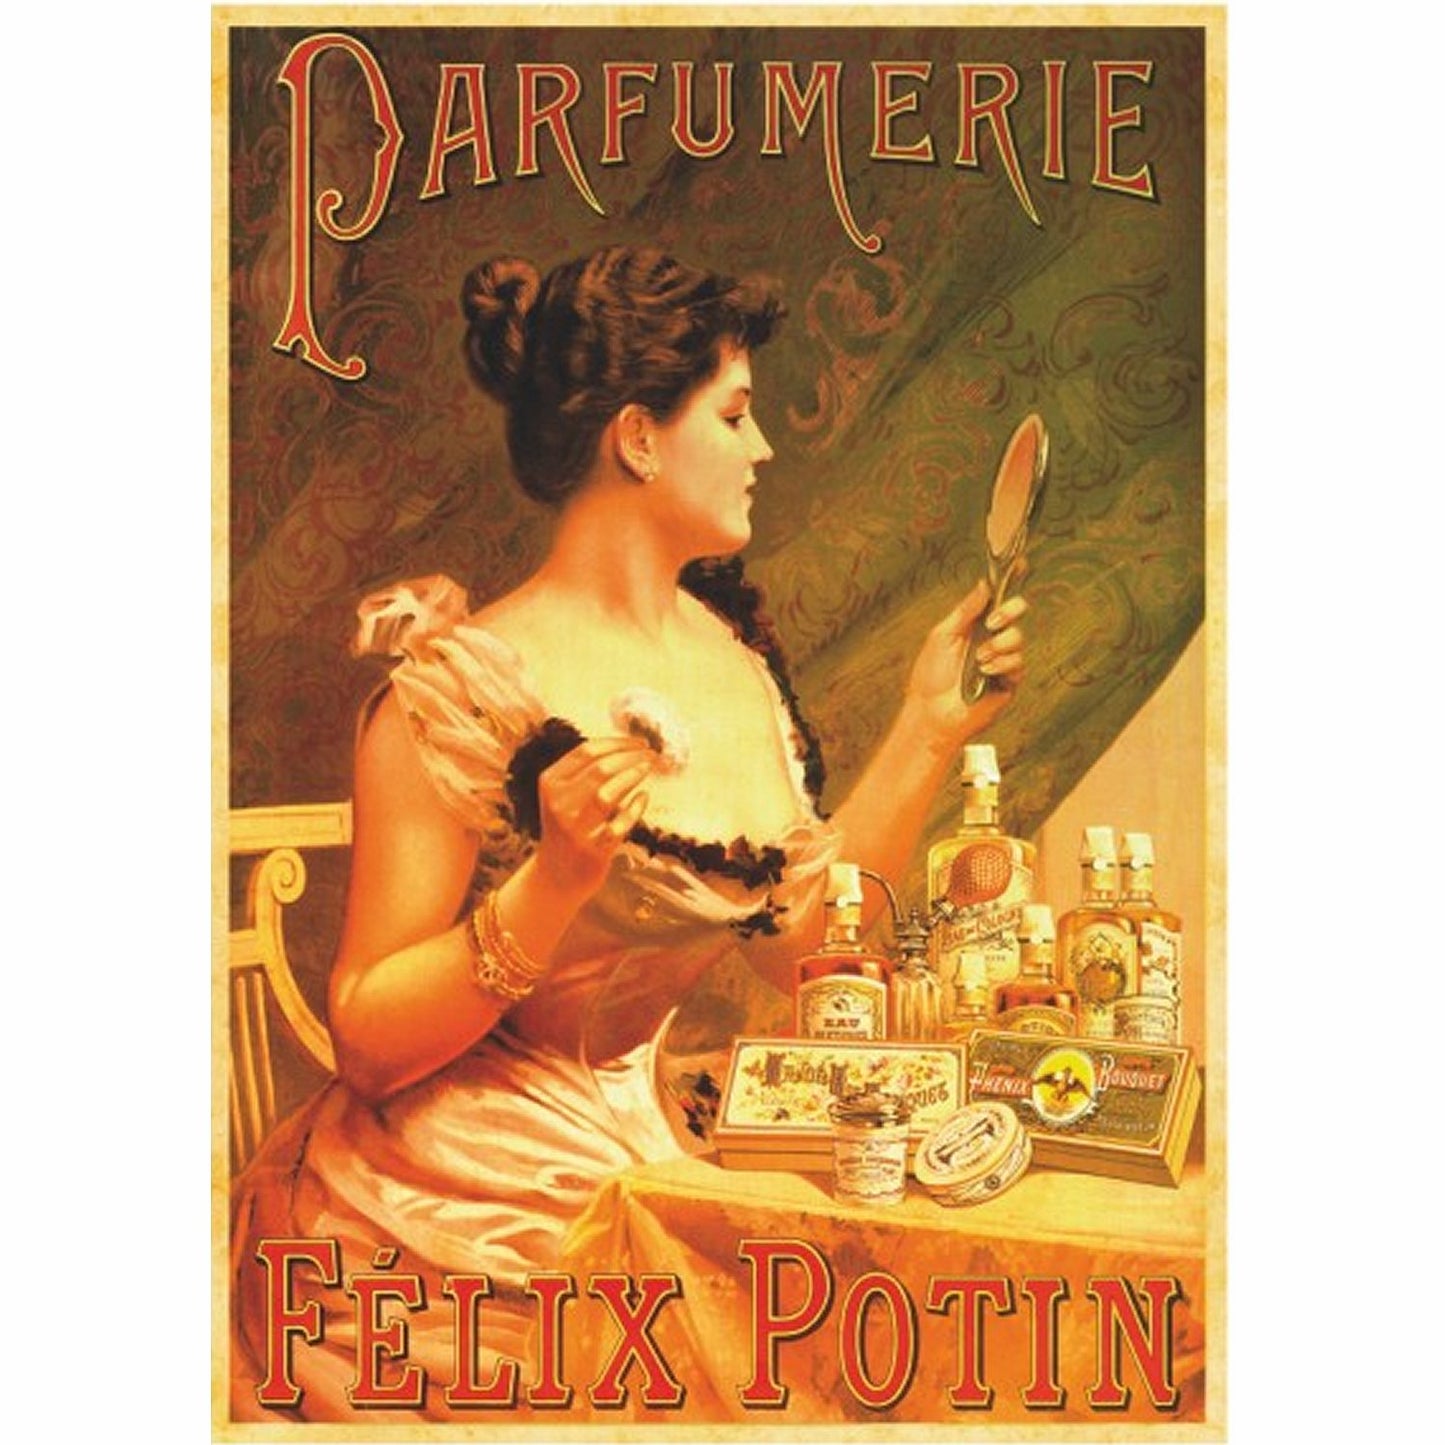 Dtoys - Jigsaw Puzzle - Vintage Posters : Perfumery - 1000 Piece Jigsaw Puzzle